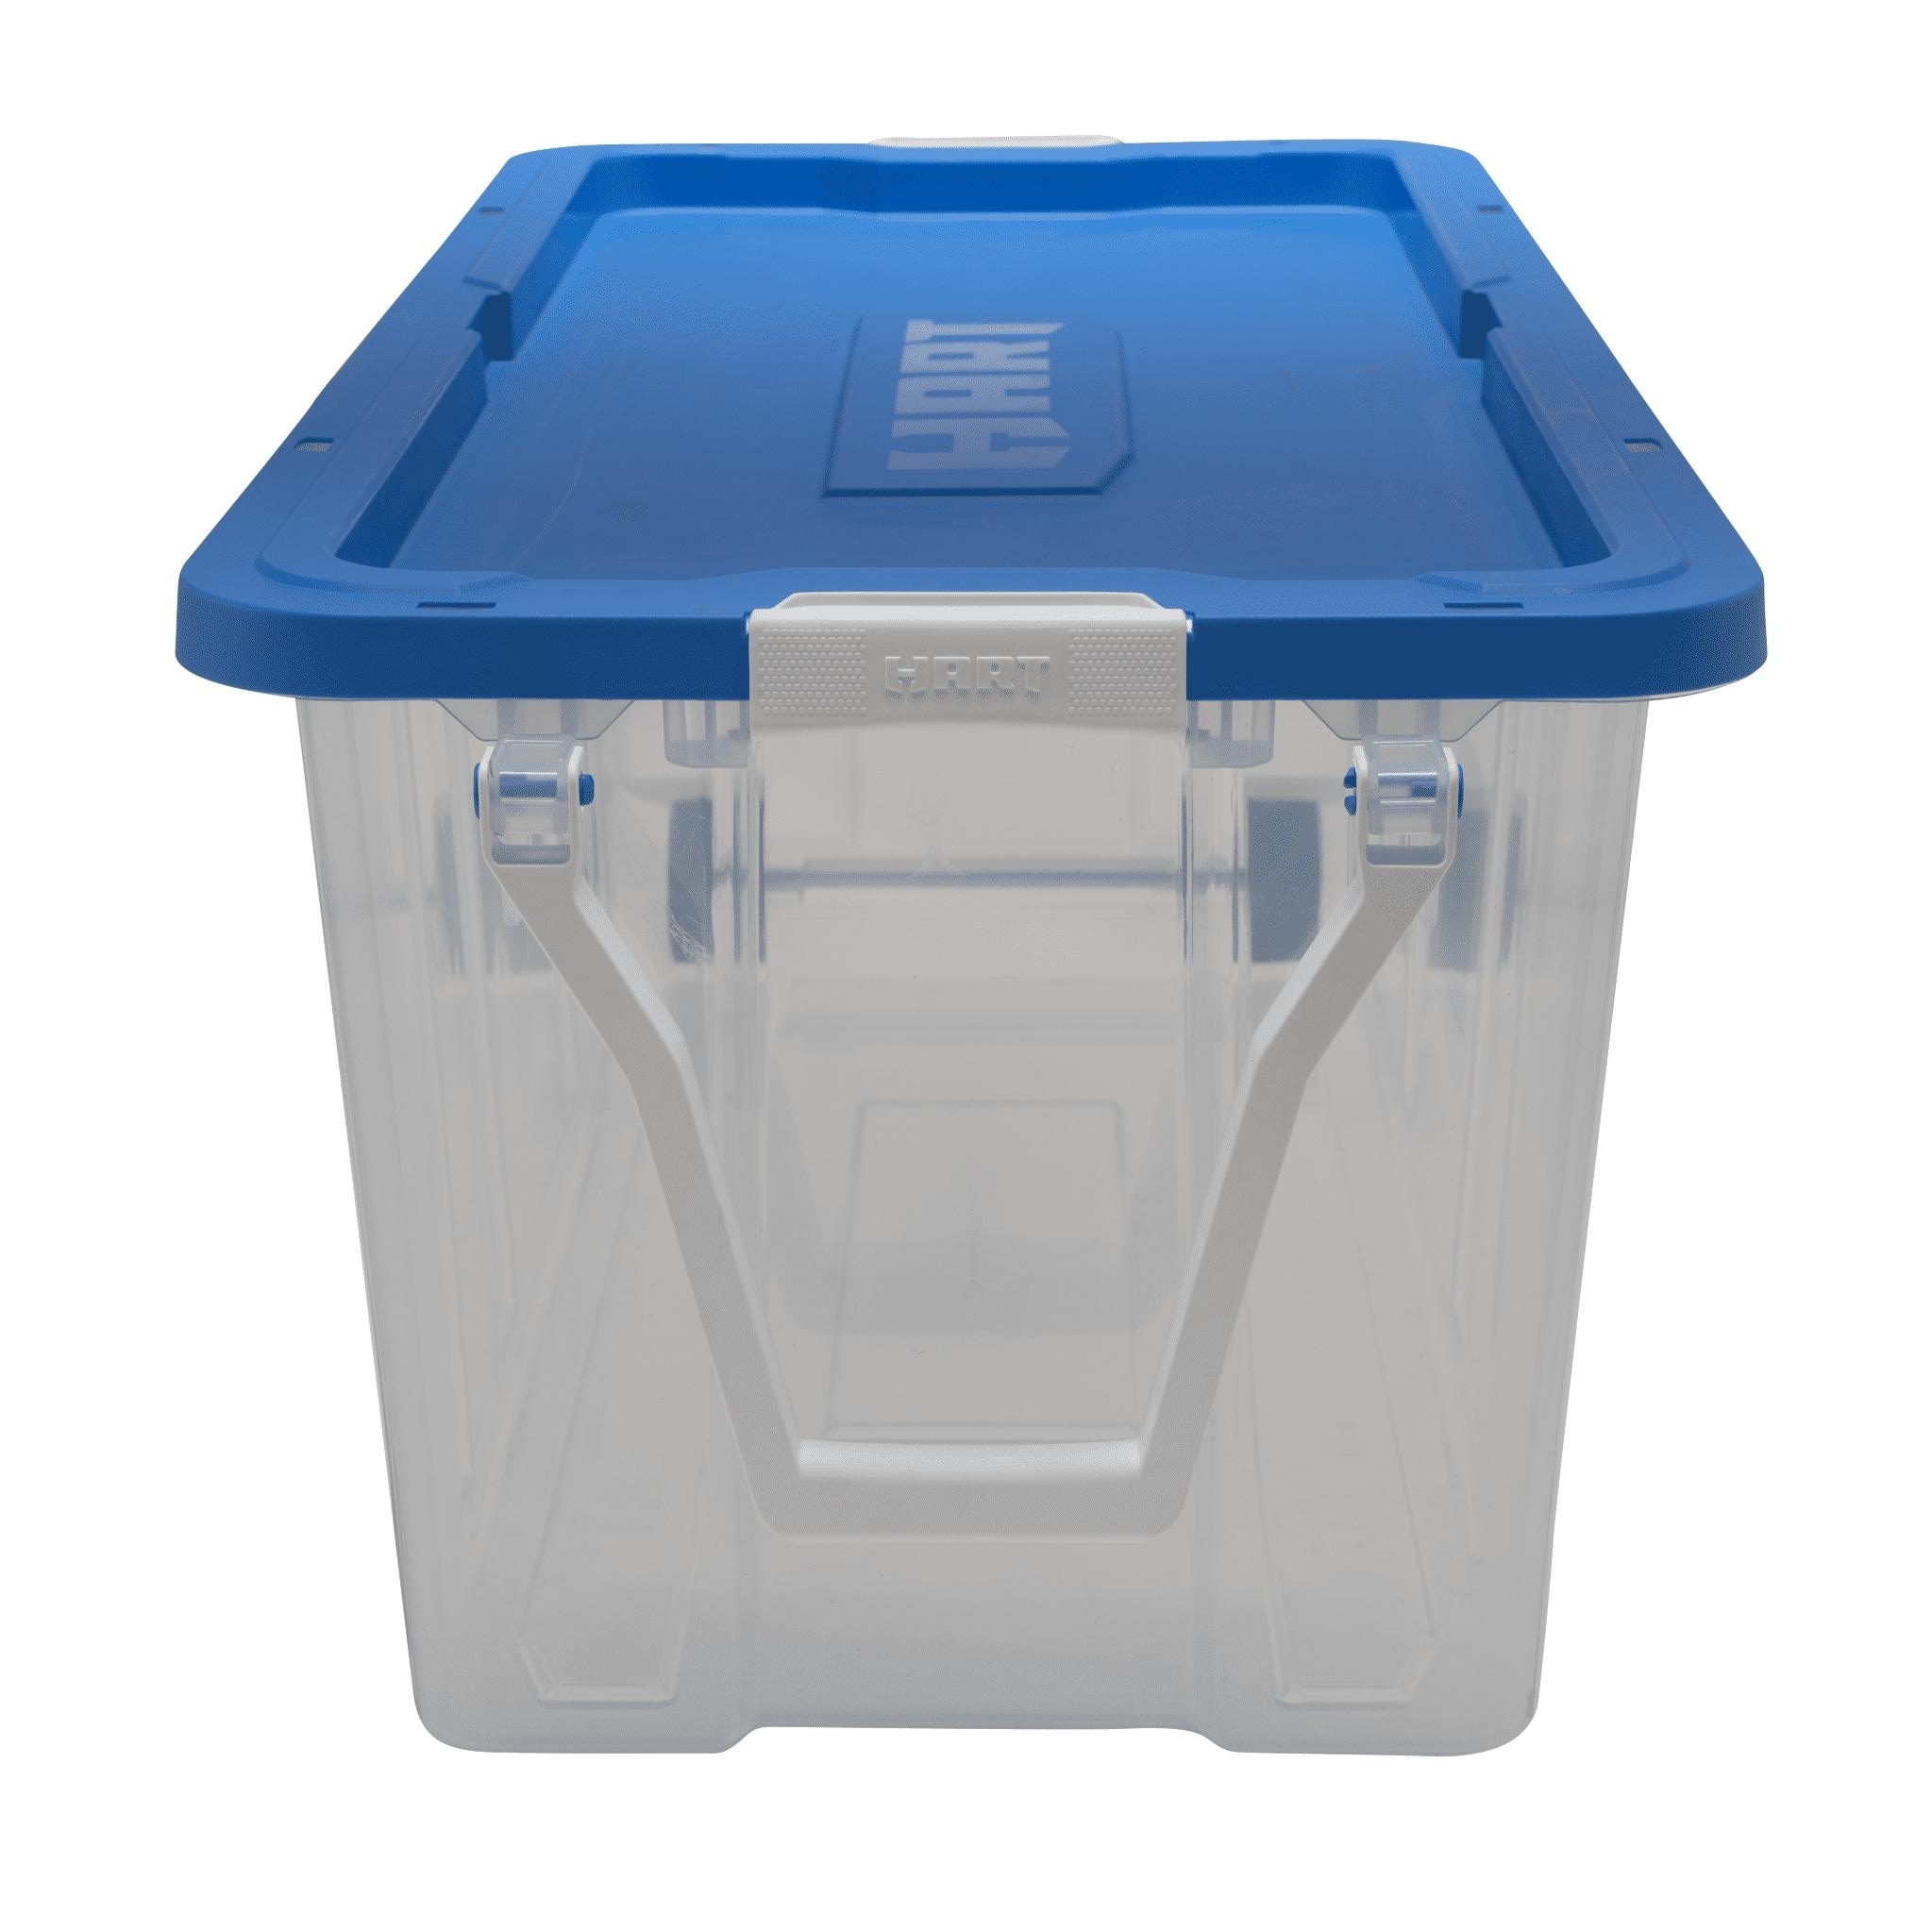 HART 40 Gallon Latching Plastic Storage Bin Container, Black with Blue Lid,  Set of 3